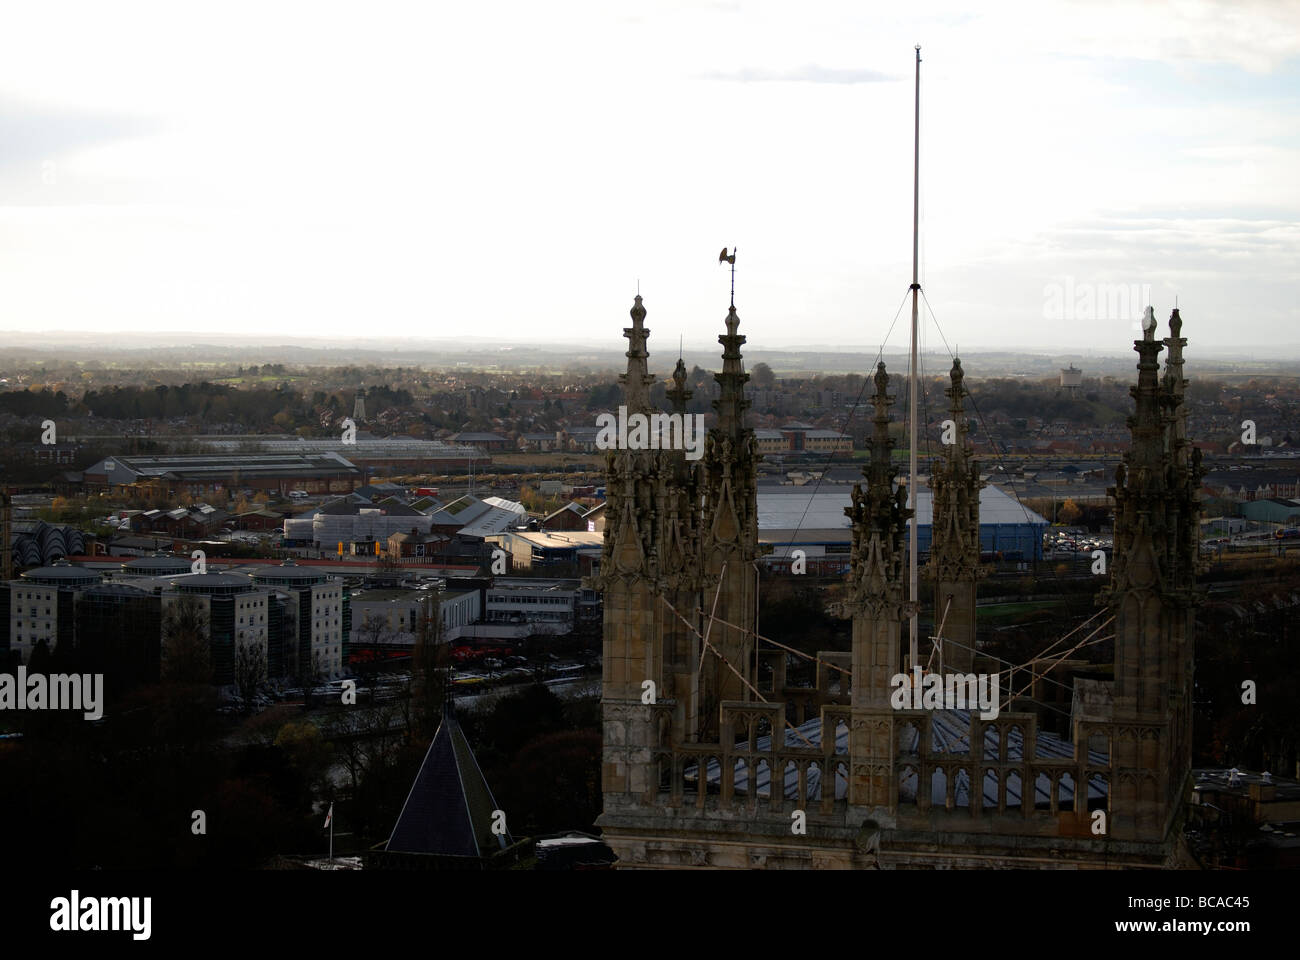 View from the central tower at York Minster looking over one of the cathedrals smaller western towers to the city below Stock Photo